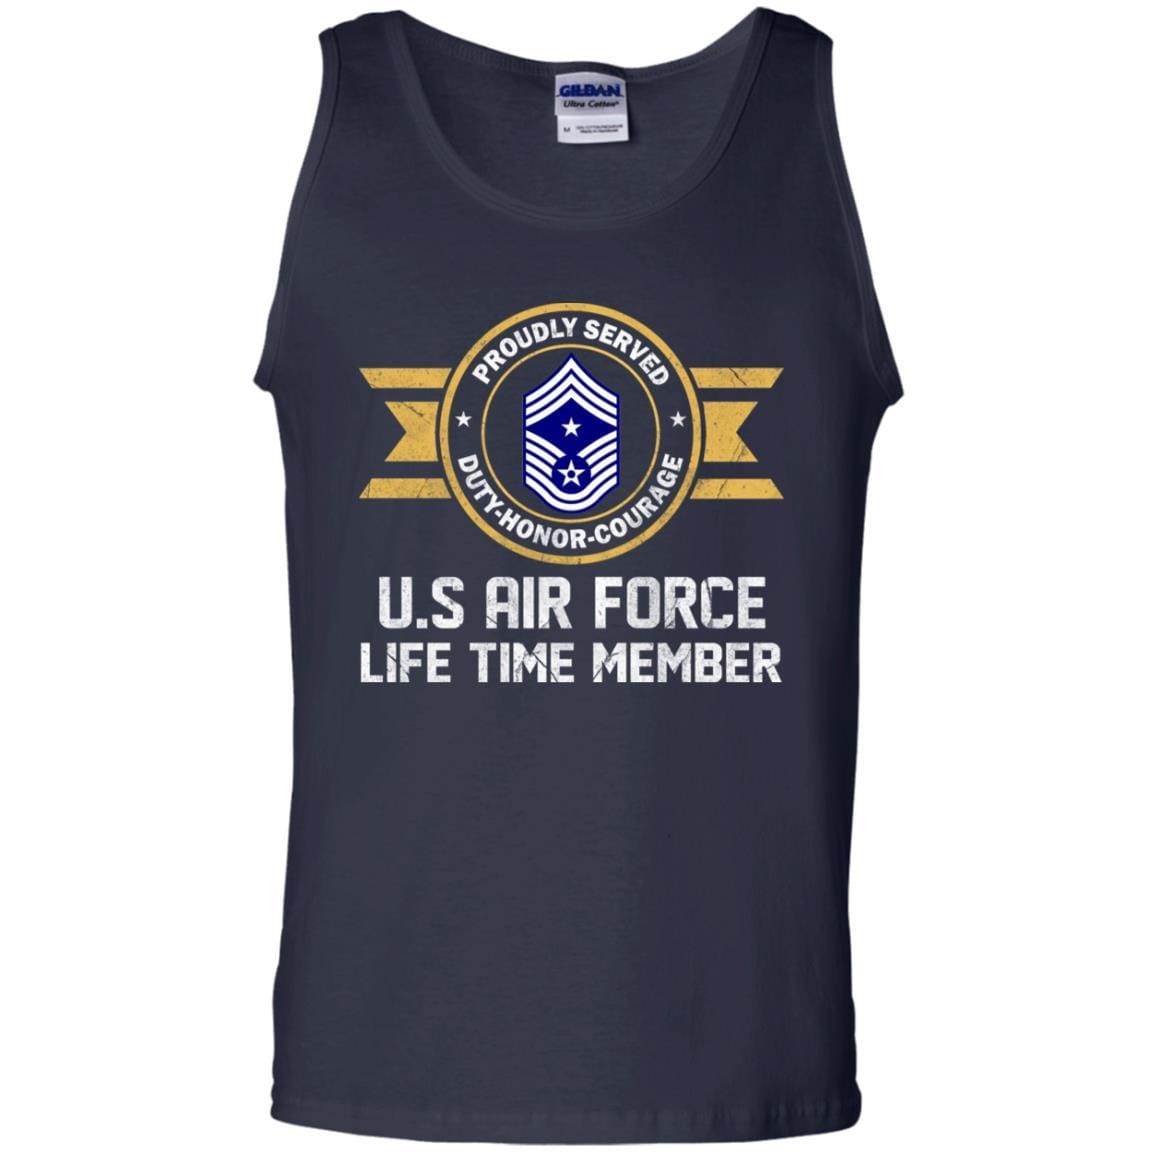 Life time member-US Air Force E-9 Command Chief Master Sergeant CCM E9 Noncommissioned Officer Ranks Men T Shirt On Front-TShirt-USAF-Veterans Nation